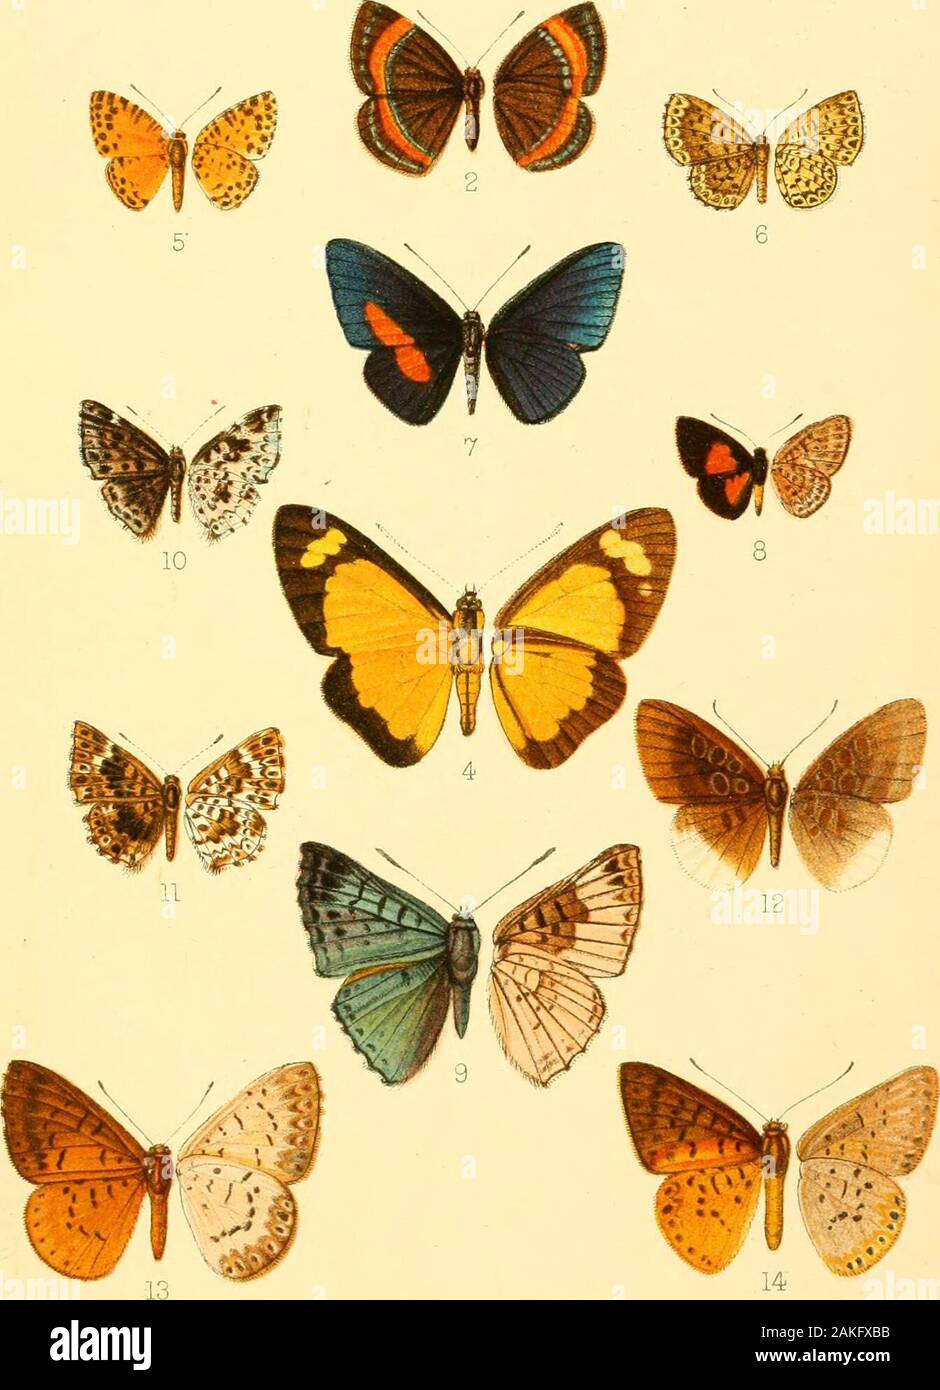 Transactions of the Entomological Society of London . Horace Kmghl adnaS.litr:. West^Newaan chromo. Central and South Americ an Erycinidae. Trans.Ent. Soc.Lon,d..l903.Fl.XYdl. w M. Horace Knight adnat.liUi. Wesl.Newman chromo. Central and South American Eryclnidae. Trrrs Ent. Soc LondJ903. PI. XIIII. Stock Photo